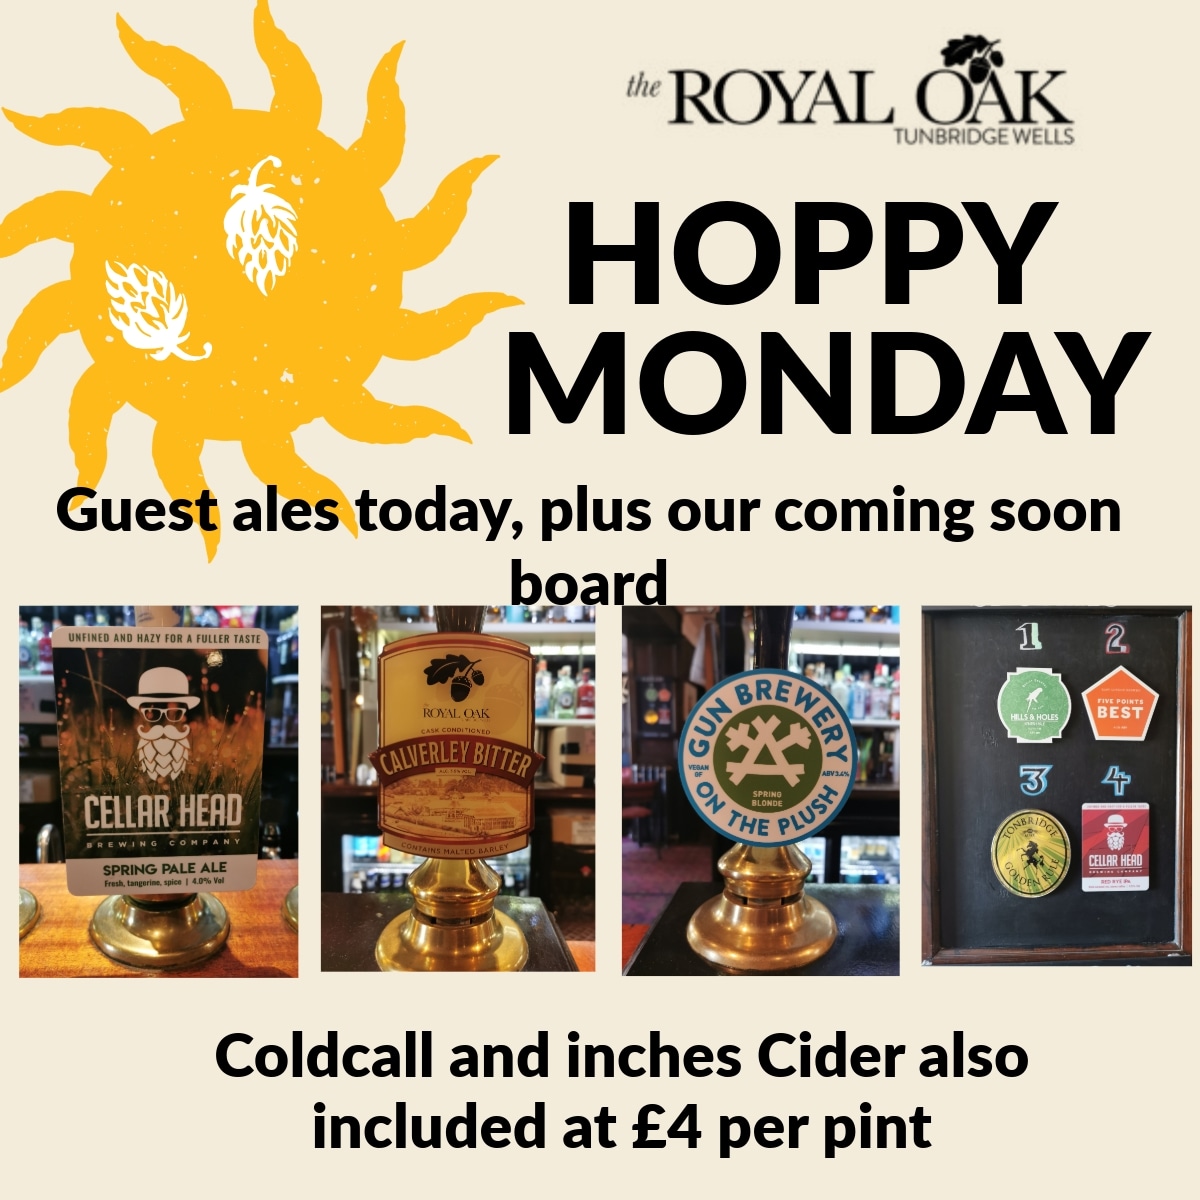 Hoppy Monday brings you guest ales from #cellarheadbrewingcompany, #gunbrewery and #calverleybitter.

OPEN from 4 today

#westkentcamra #twcaskale #twpubs #twrealale #realale #realalefinder #harveysbrewery